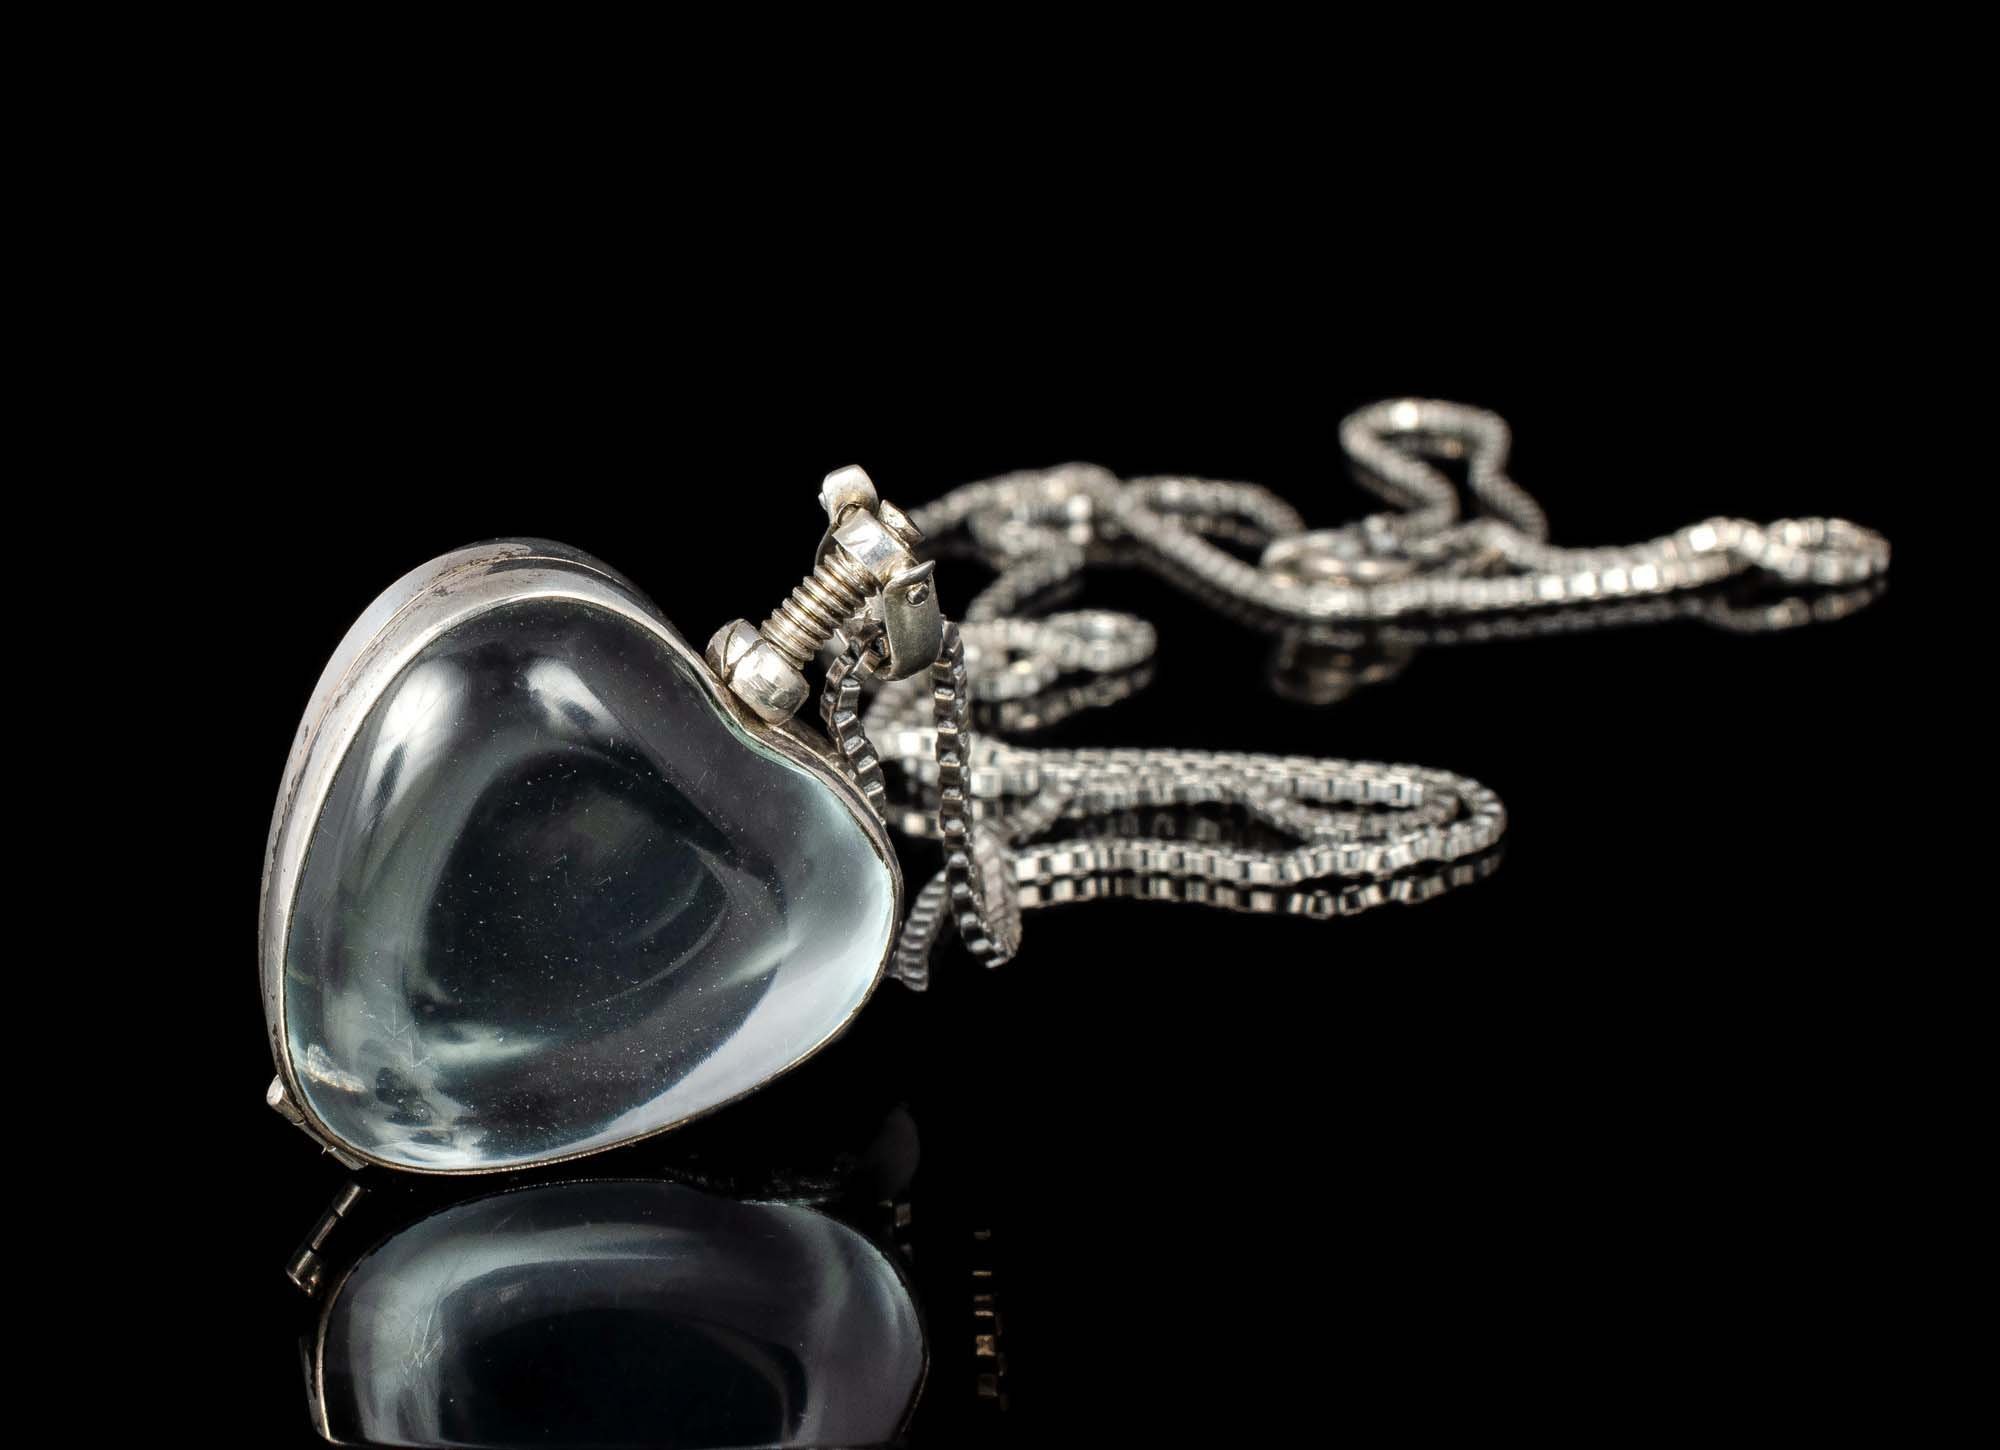 Clear Tribute necklace urns and glass memorial pendants as a touching memory